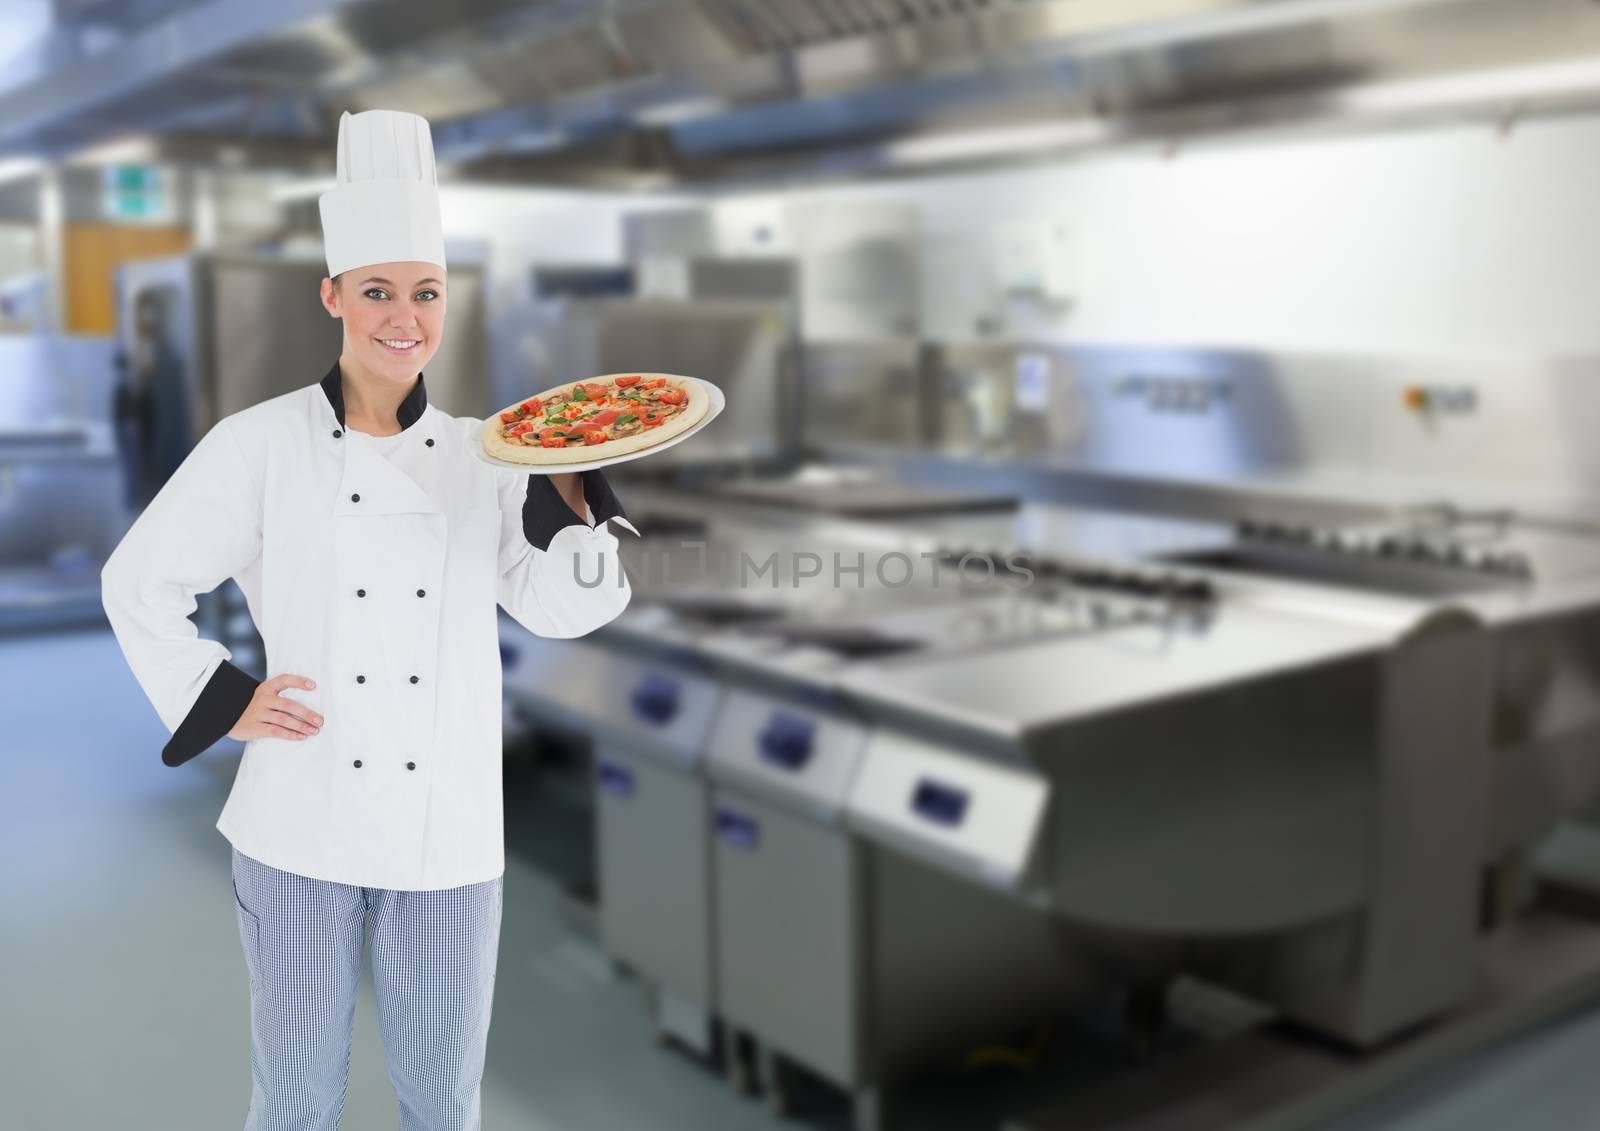 Chef with pizza in the restaurants kitchen by Wavebreakmedia